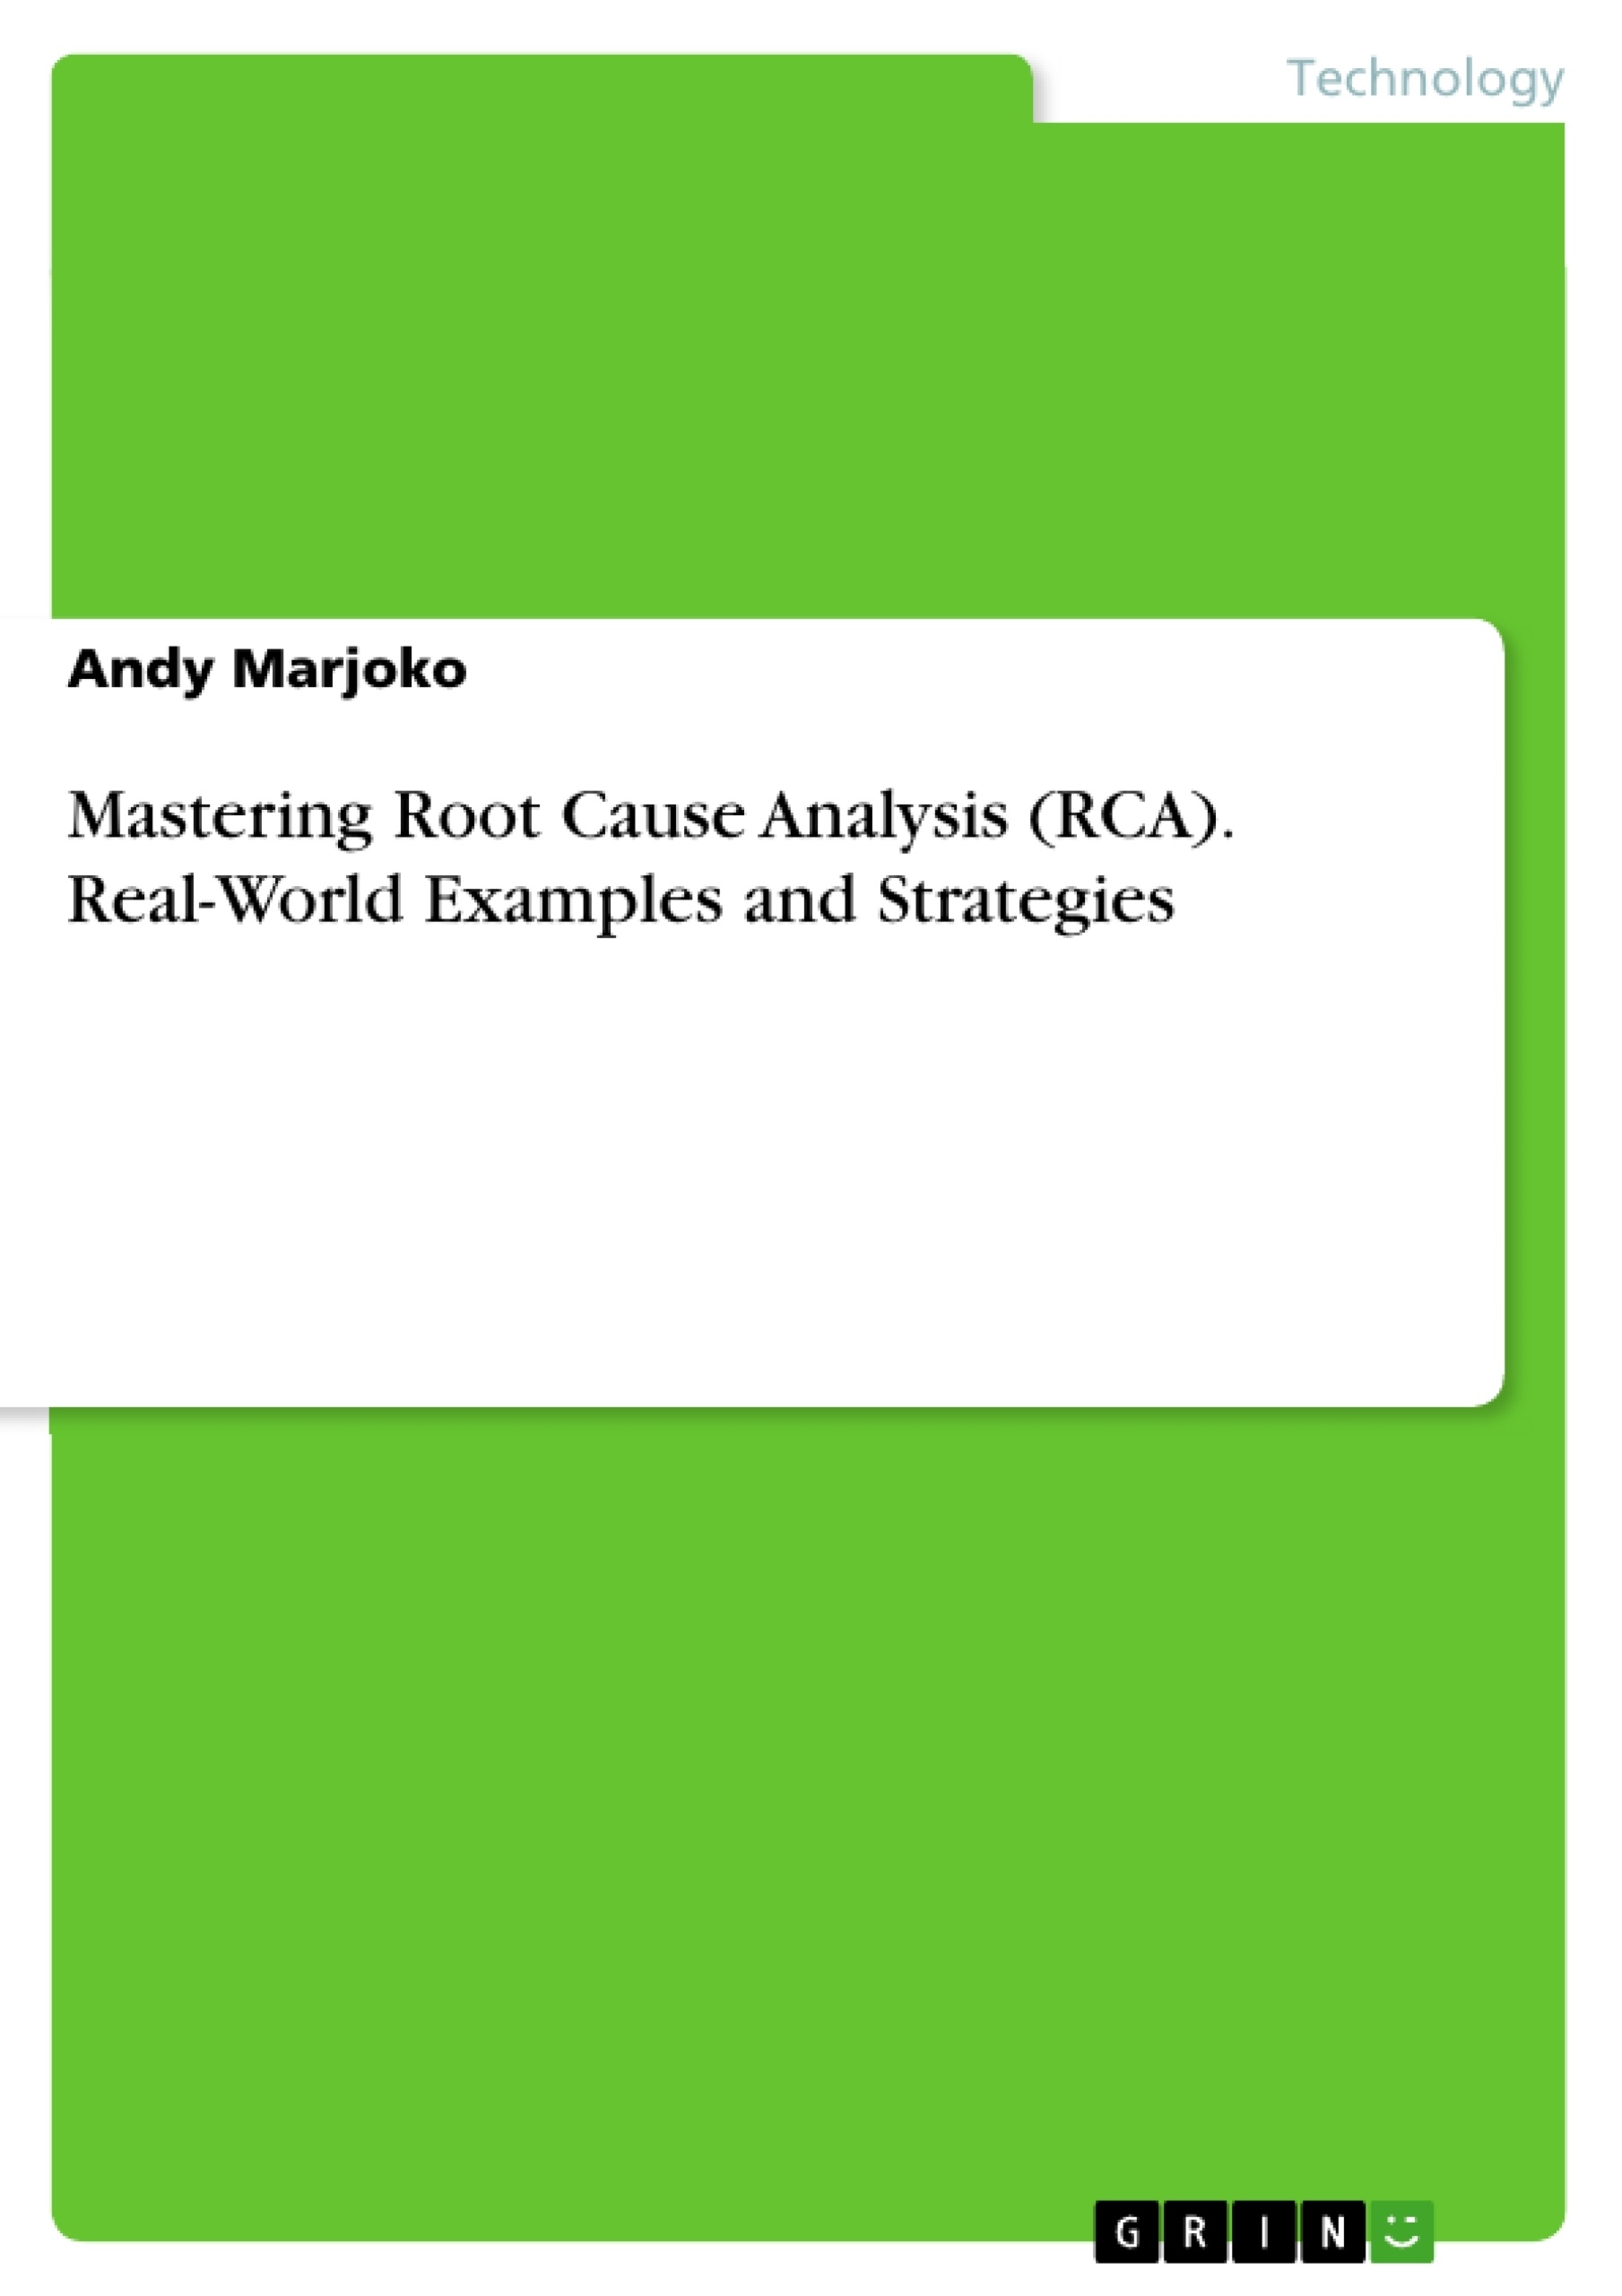 Title: Mastering Root Cause Analysis (RCA). Real-World Examples and Strategies